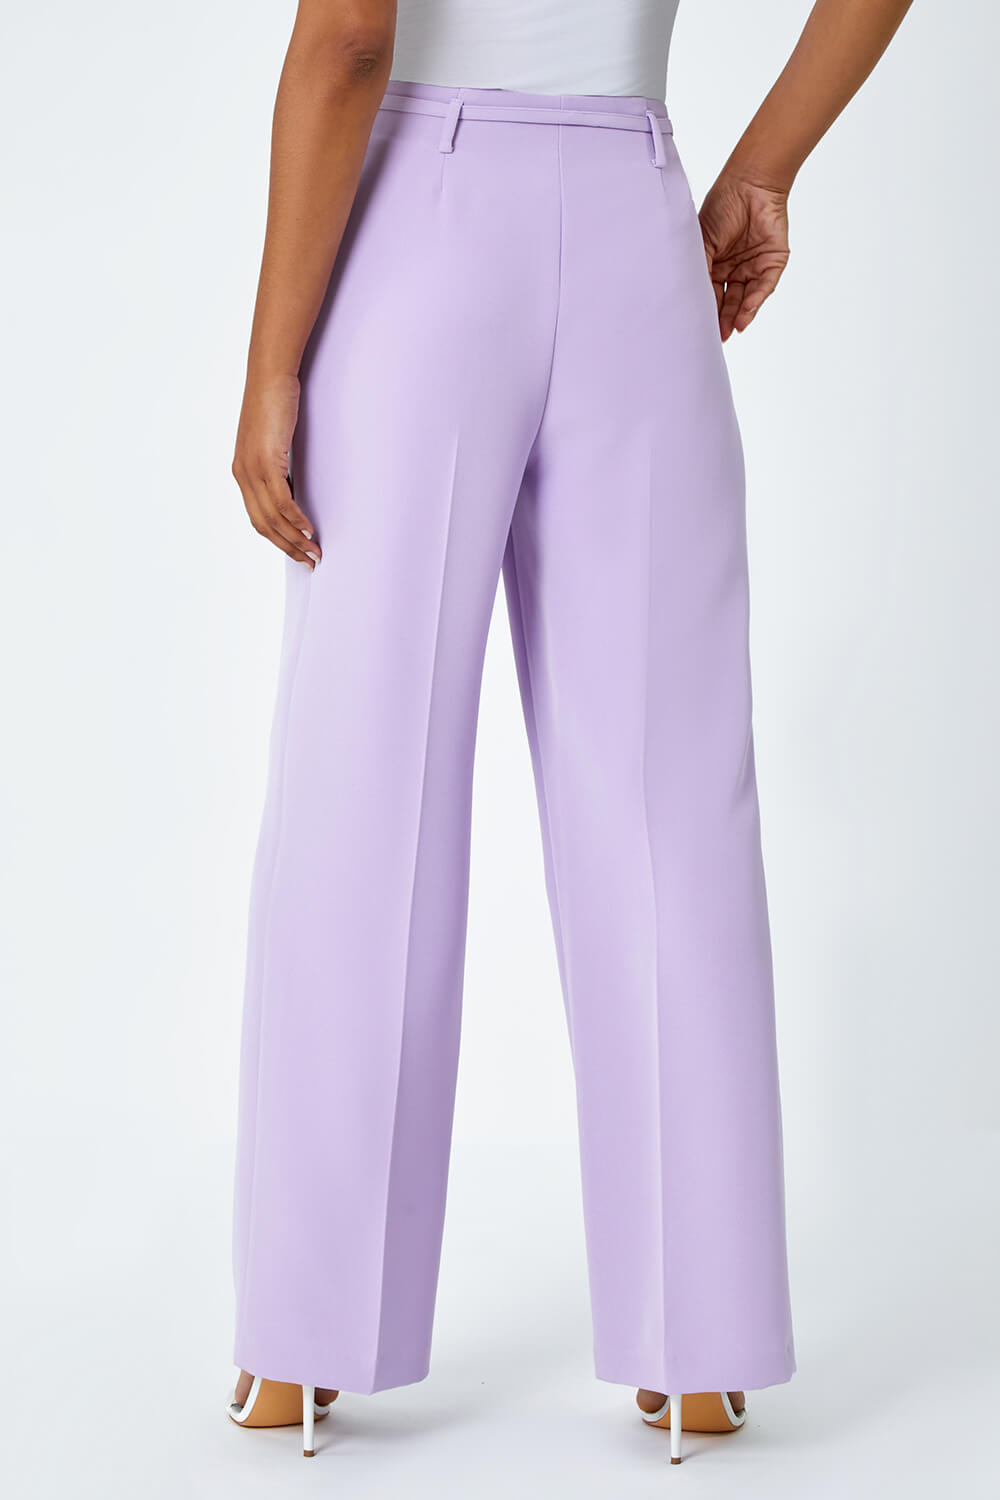 Lilac Crepe Stretch Straight Leg Trousers, Image 3 of 6